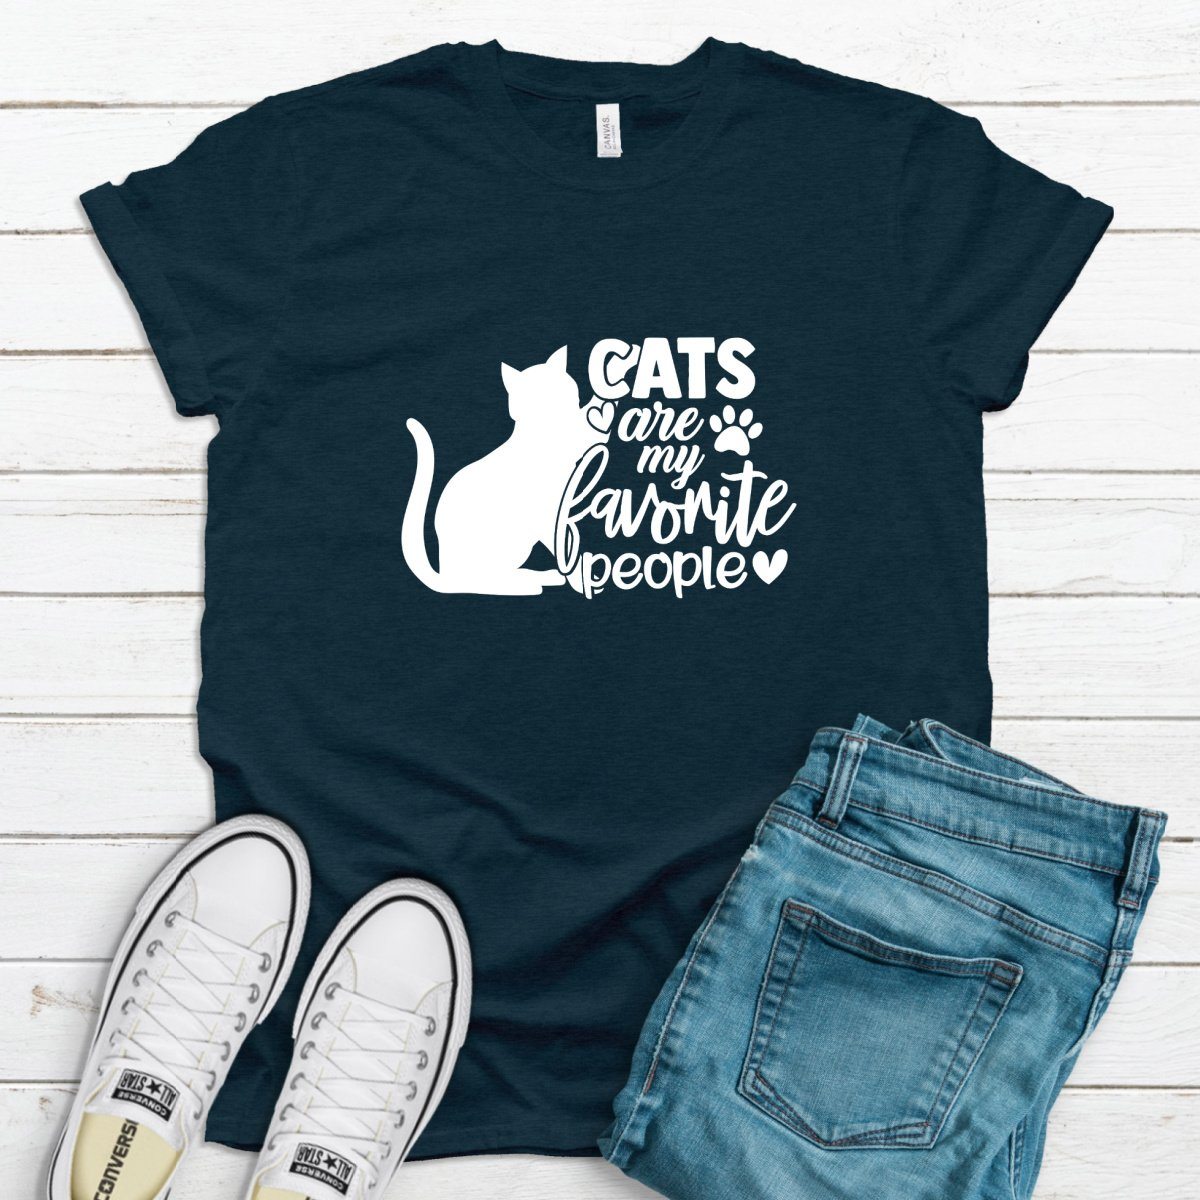 Cats are my favorite people shirt Adult Tee Shirt The Teal Bandit 